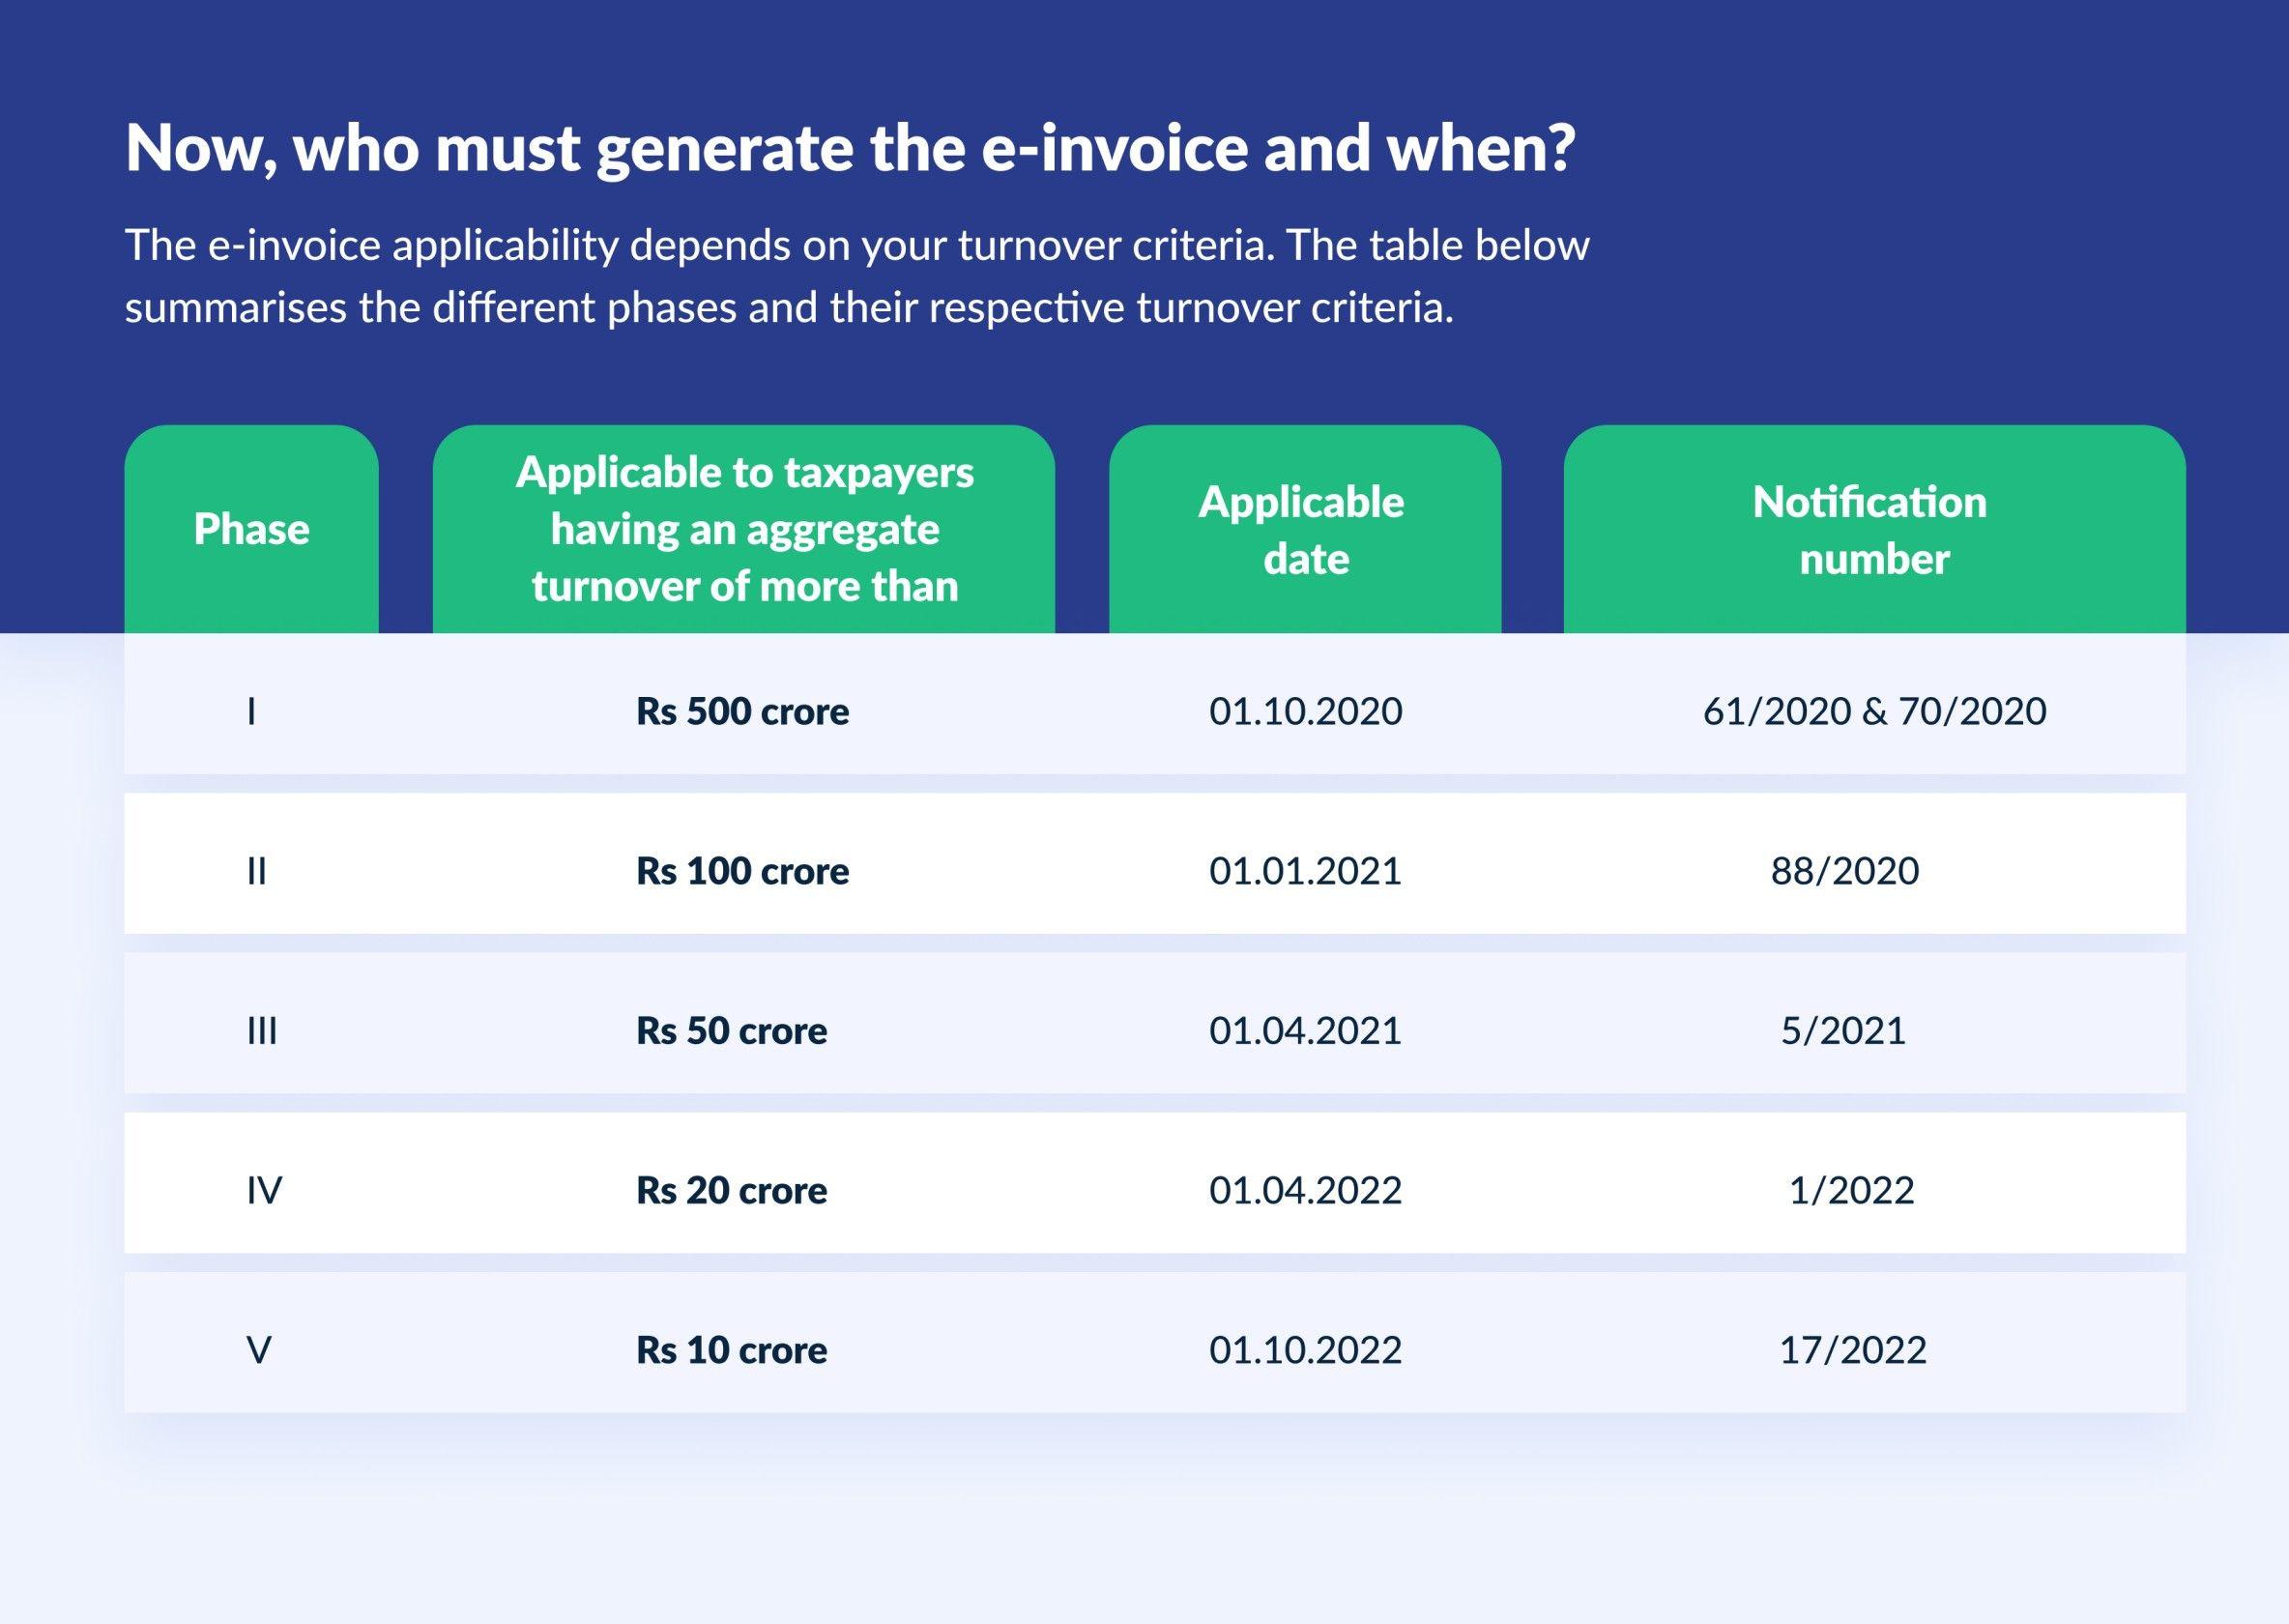 Who Must Generate the E-invoice and When